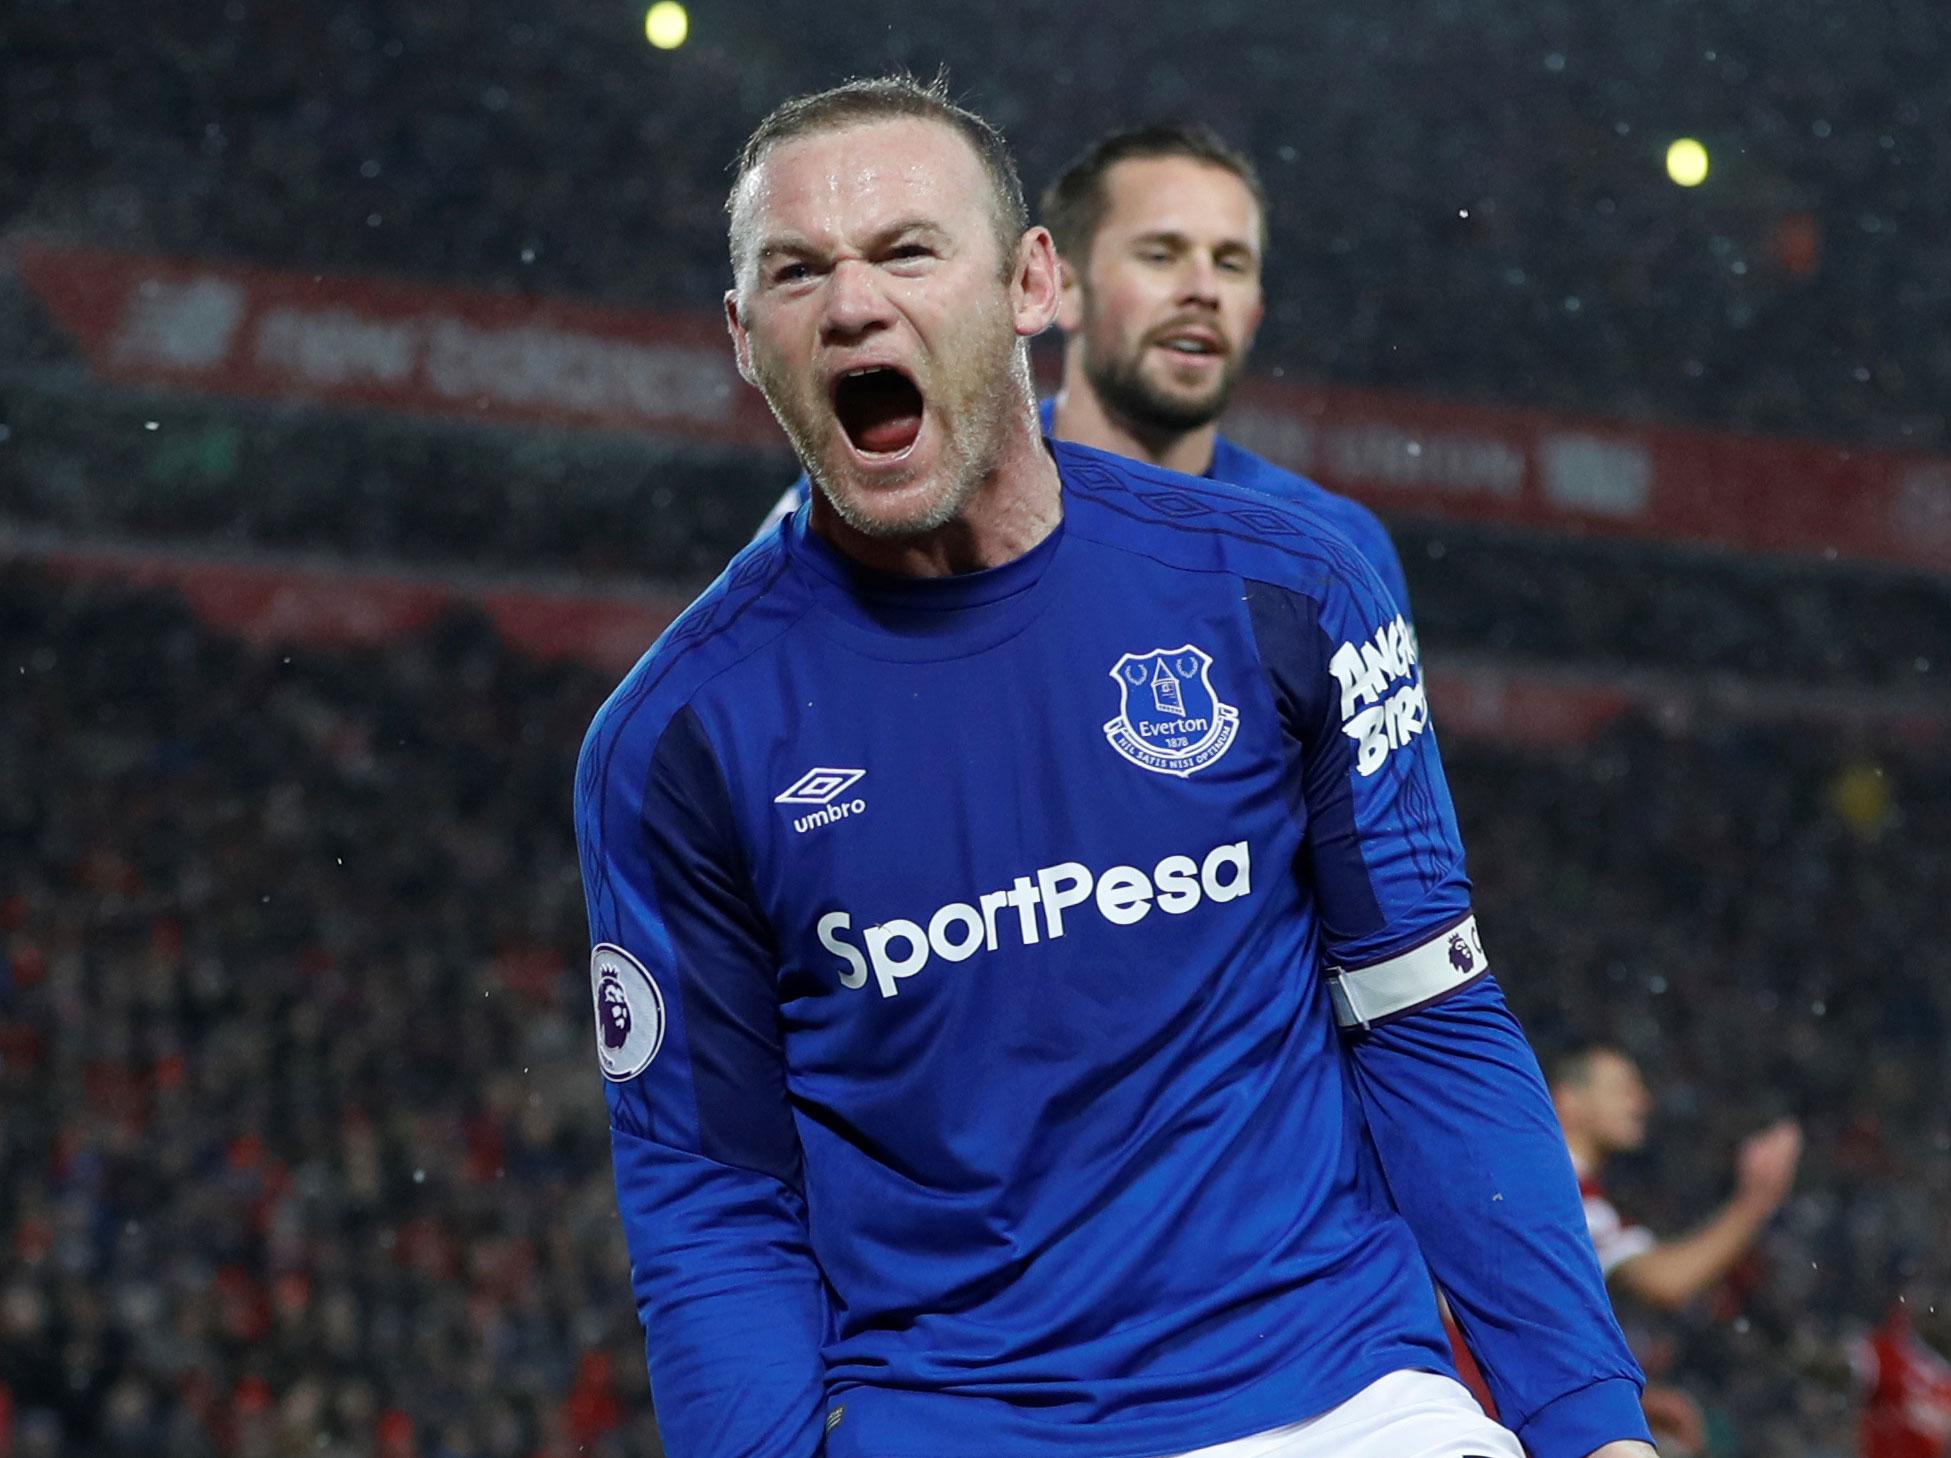 Wayne Rooney was the man on the spot for Everton in the derby